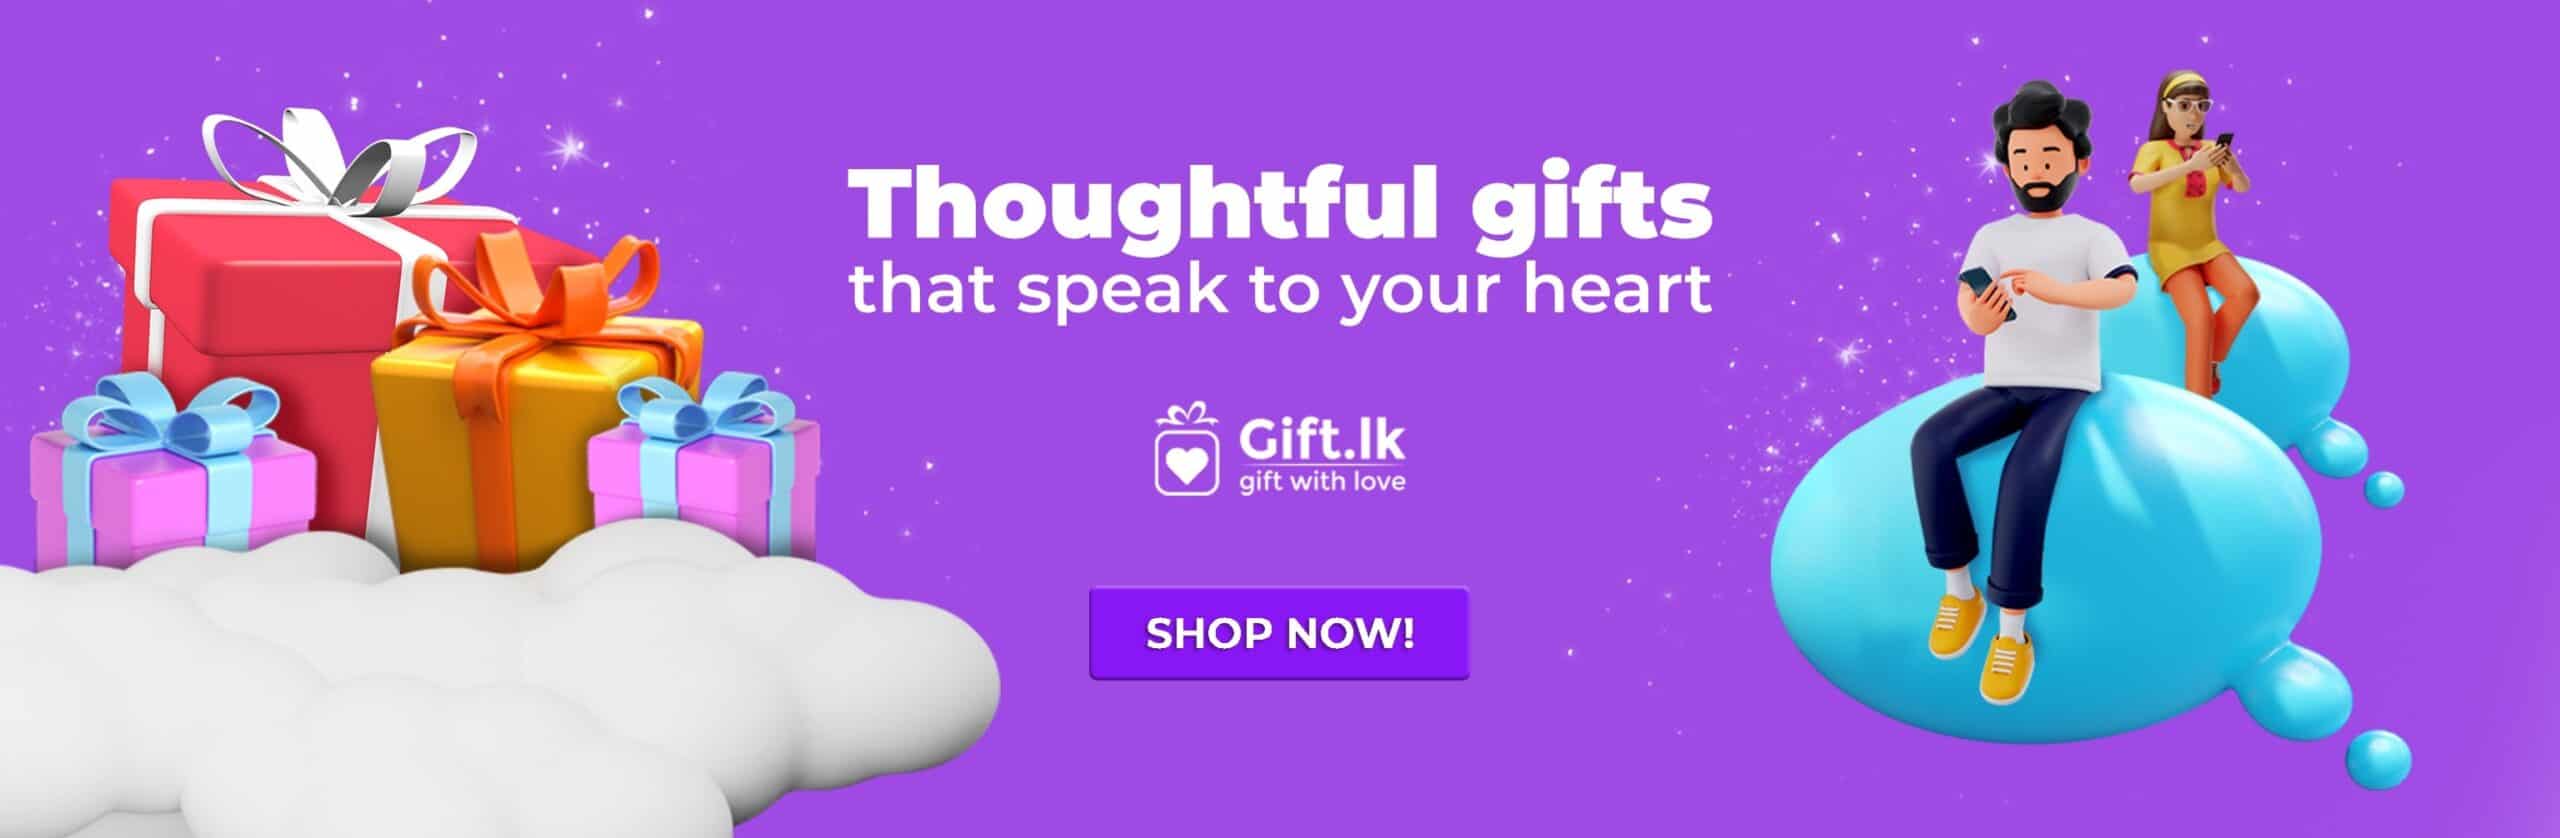 thought-full-gifts